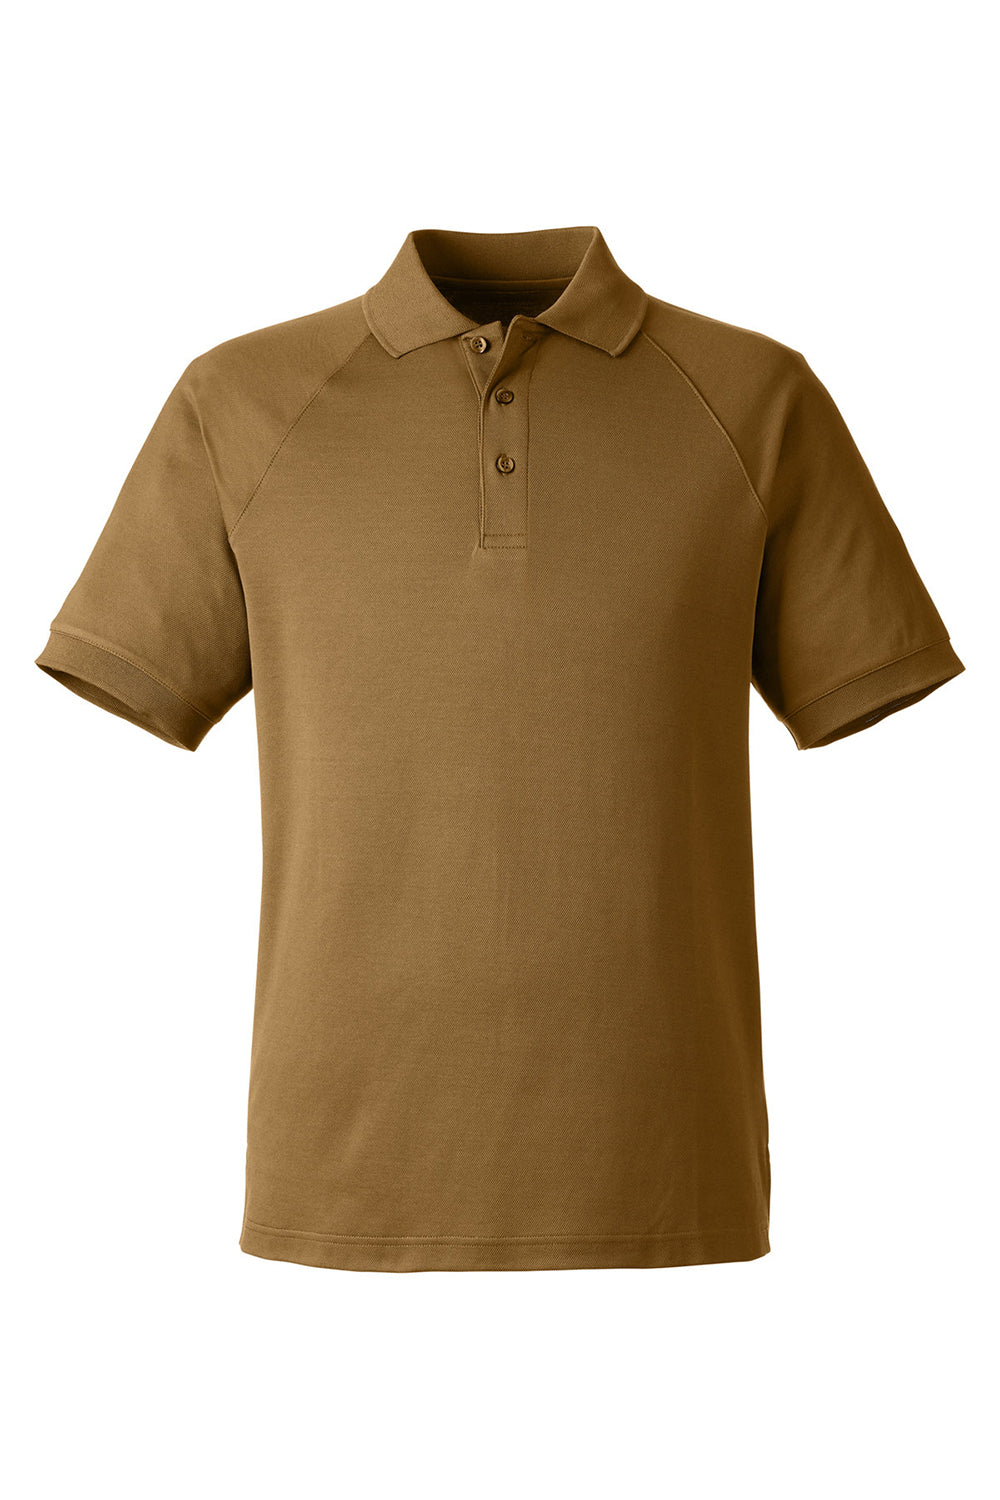 Harriton M208 Mens Charge Moisture Wicking Short Sleeve Polo Shirt Coyote Brown Flat Front